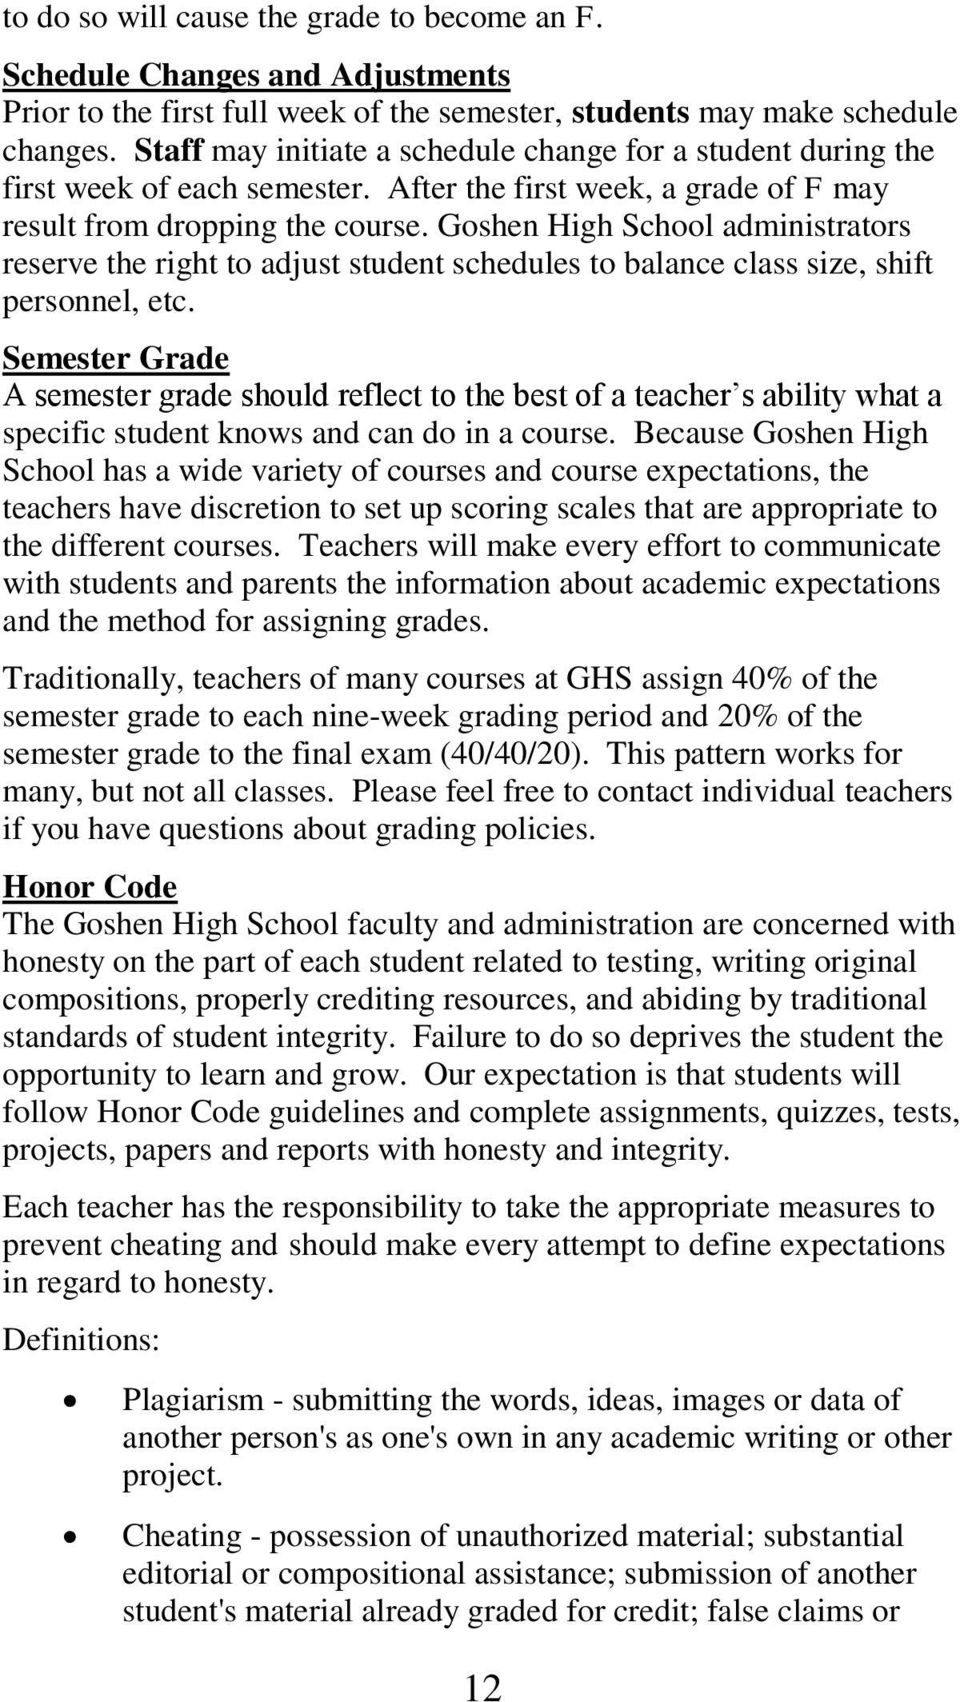 Goshen High School administrators reserve the right to adjust student schedules to balance class size, shift personnel, etc.